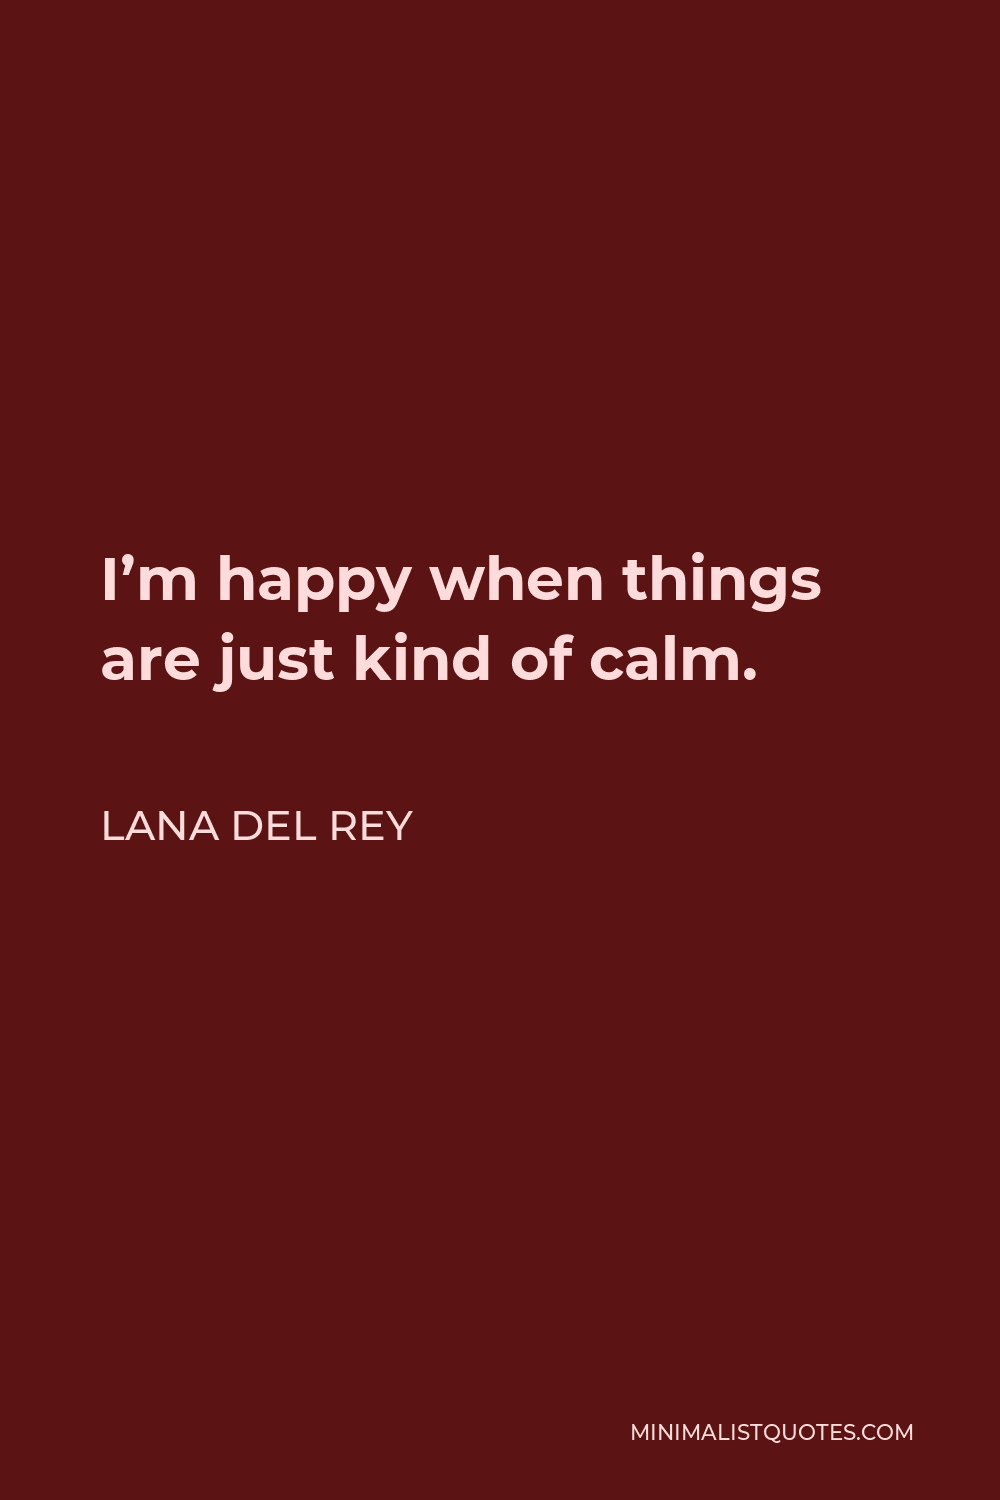 Lana Del Rey Quote - I’m happy when things are just kind of calm.